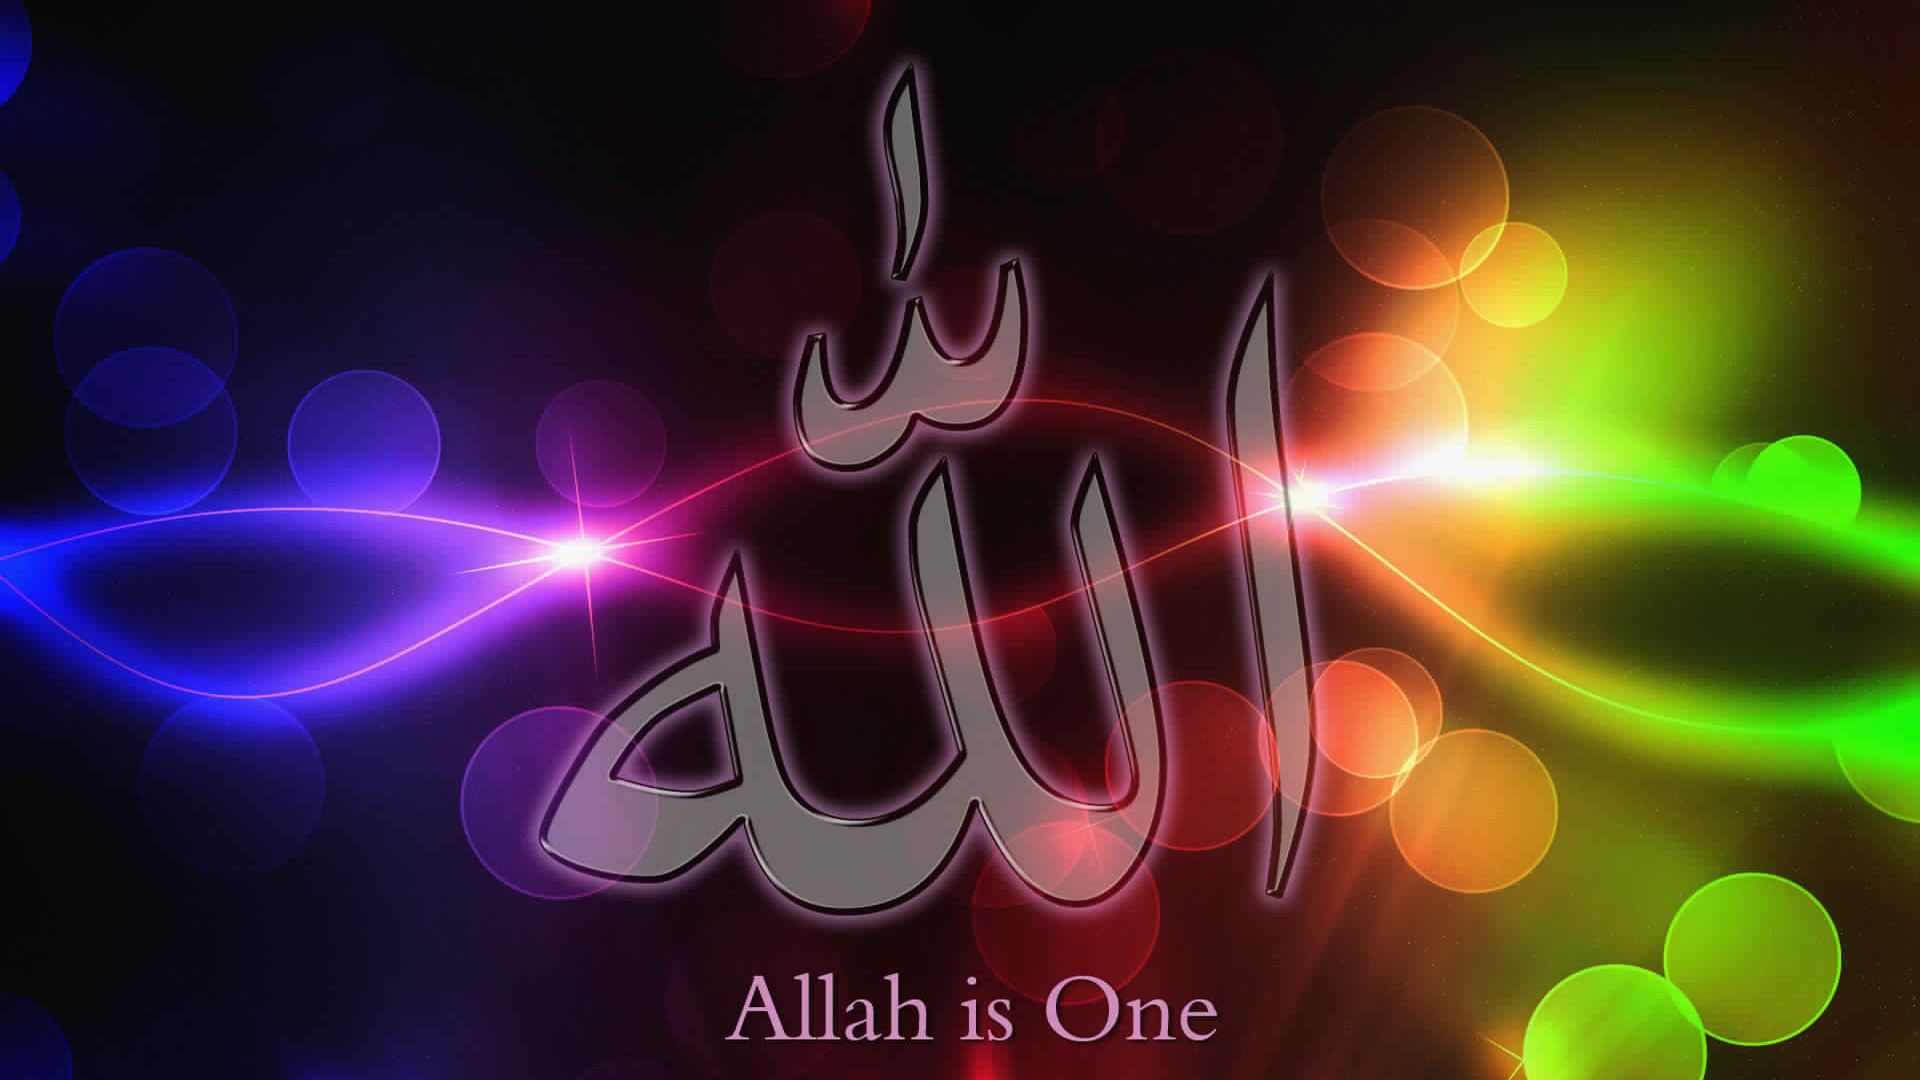 Islamic Hd Wallpapers For Mobile